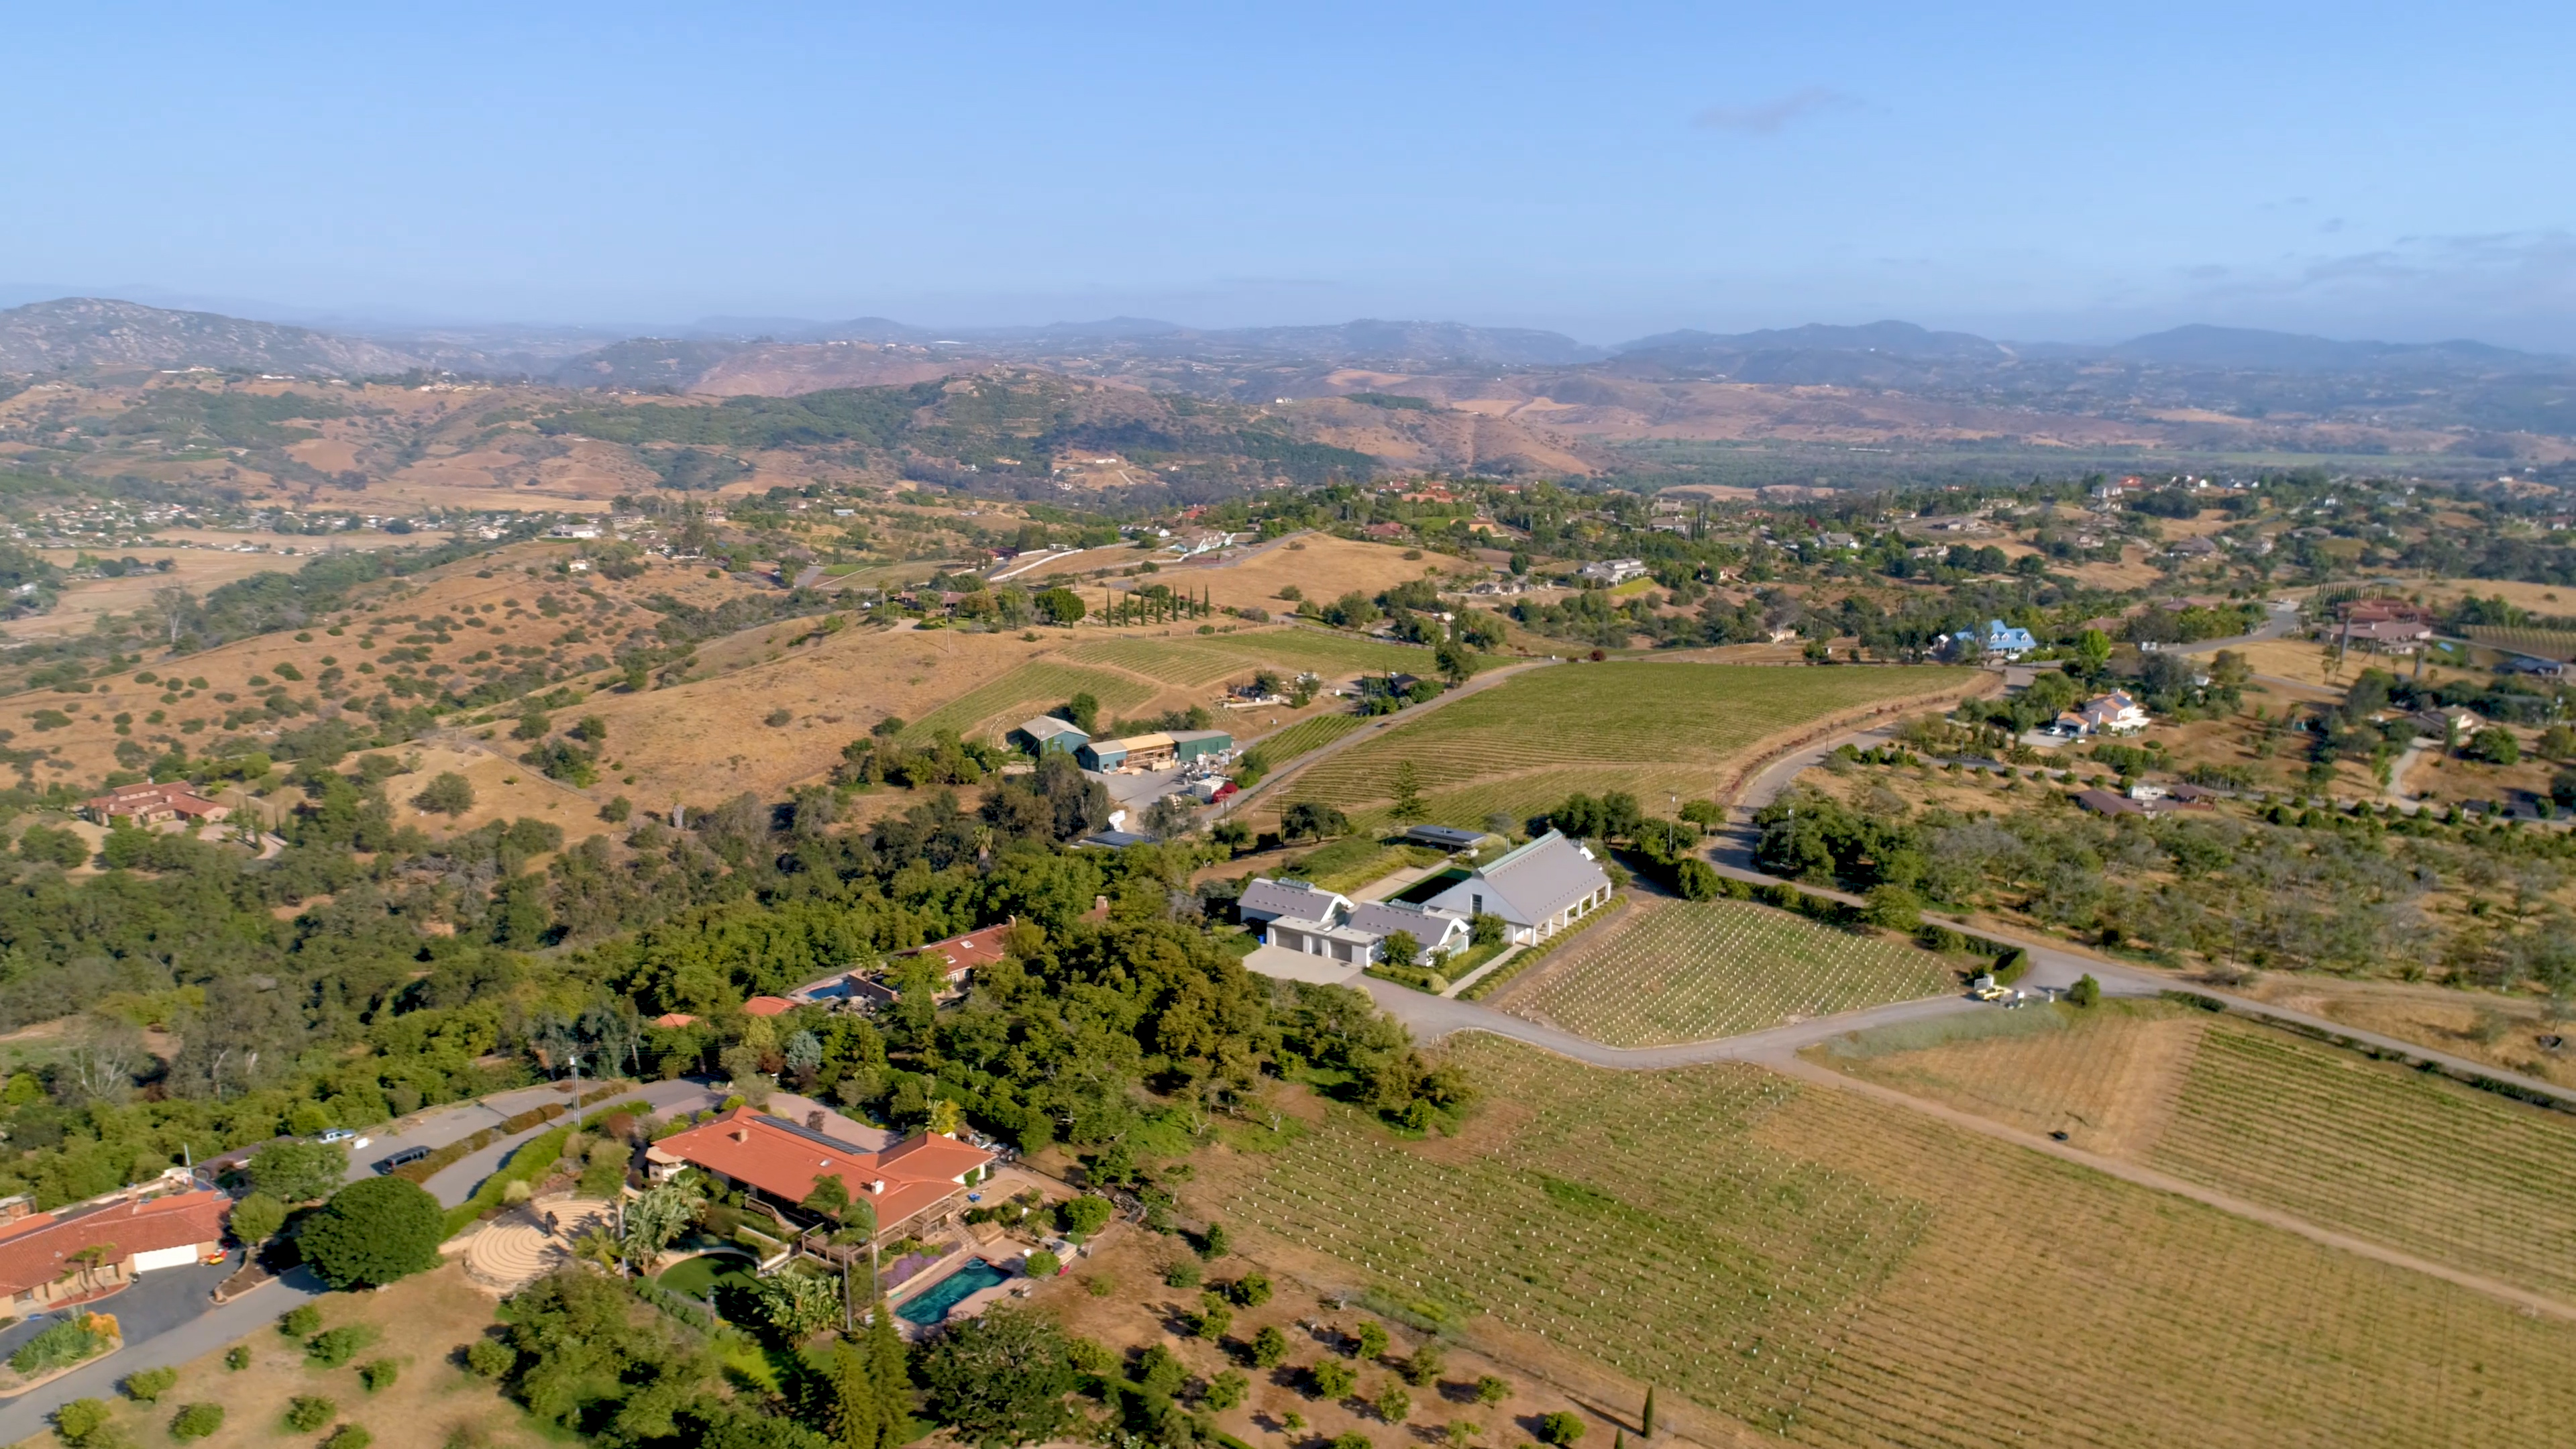 Fallbrook California Offers Charming, Small Town Living with a Beautiful Countryside | Video Sells Real Estate